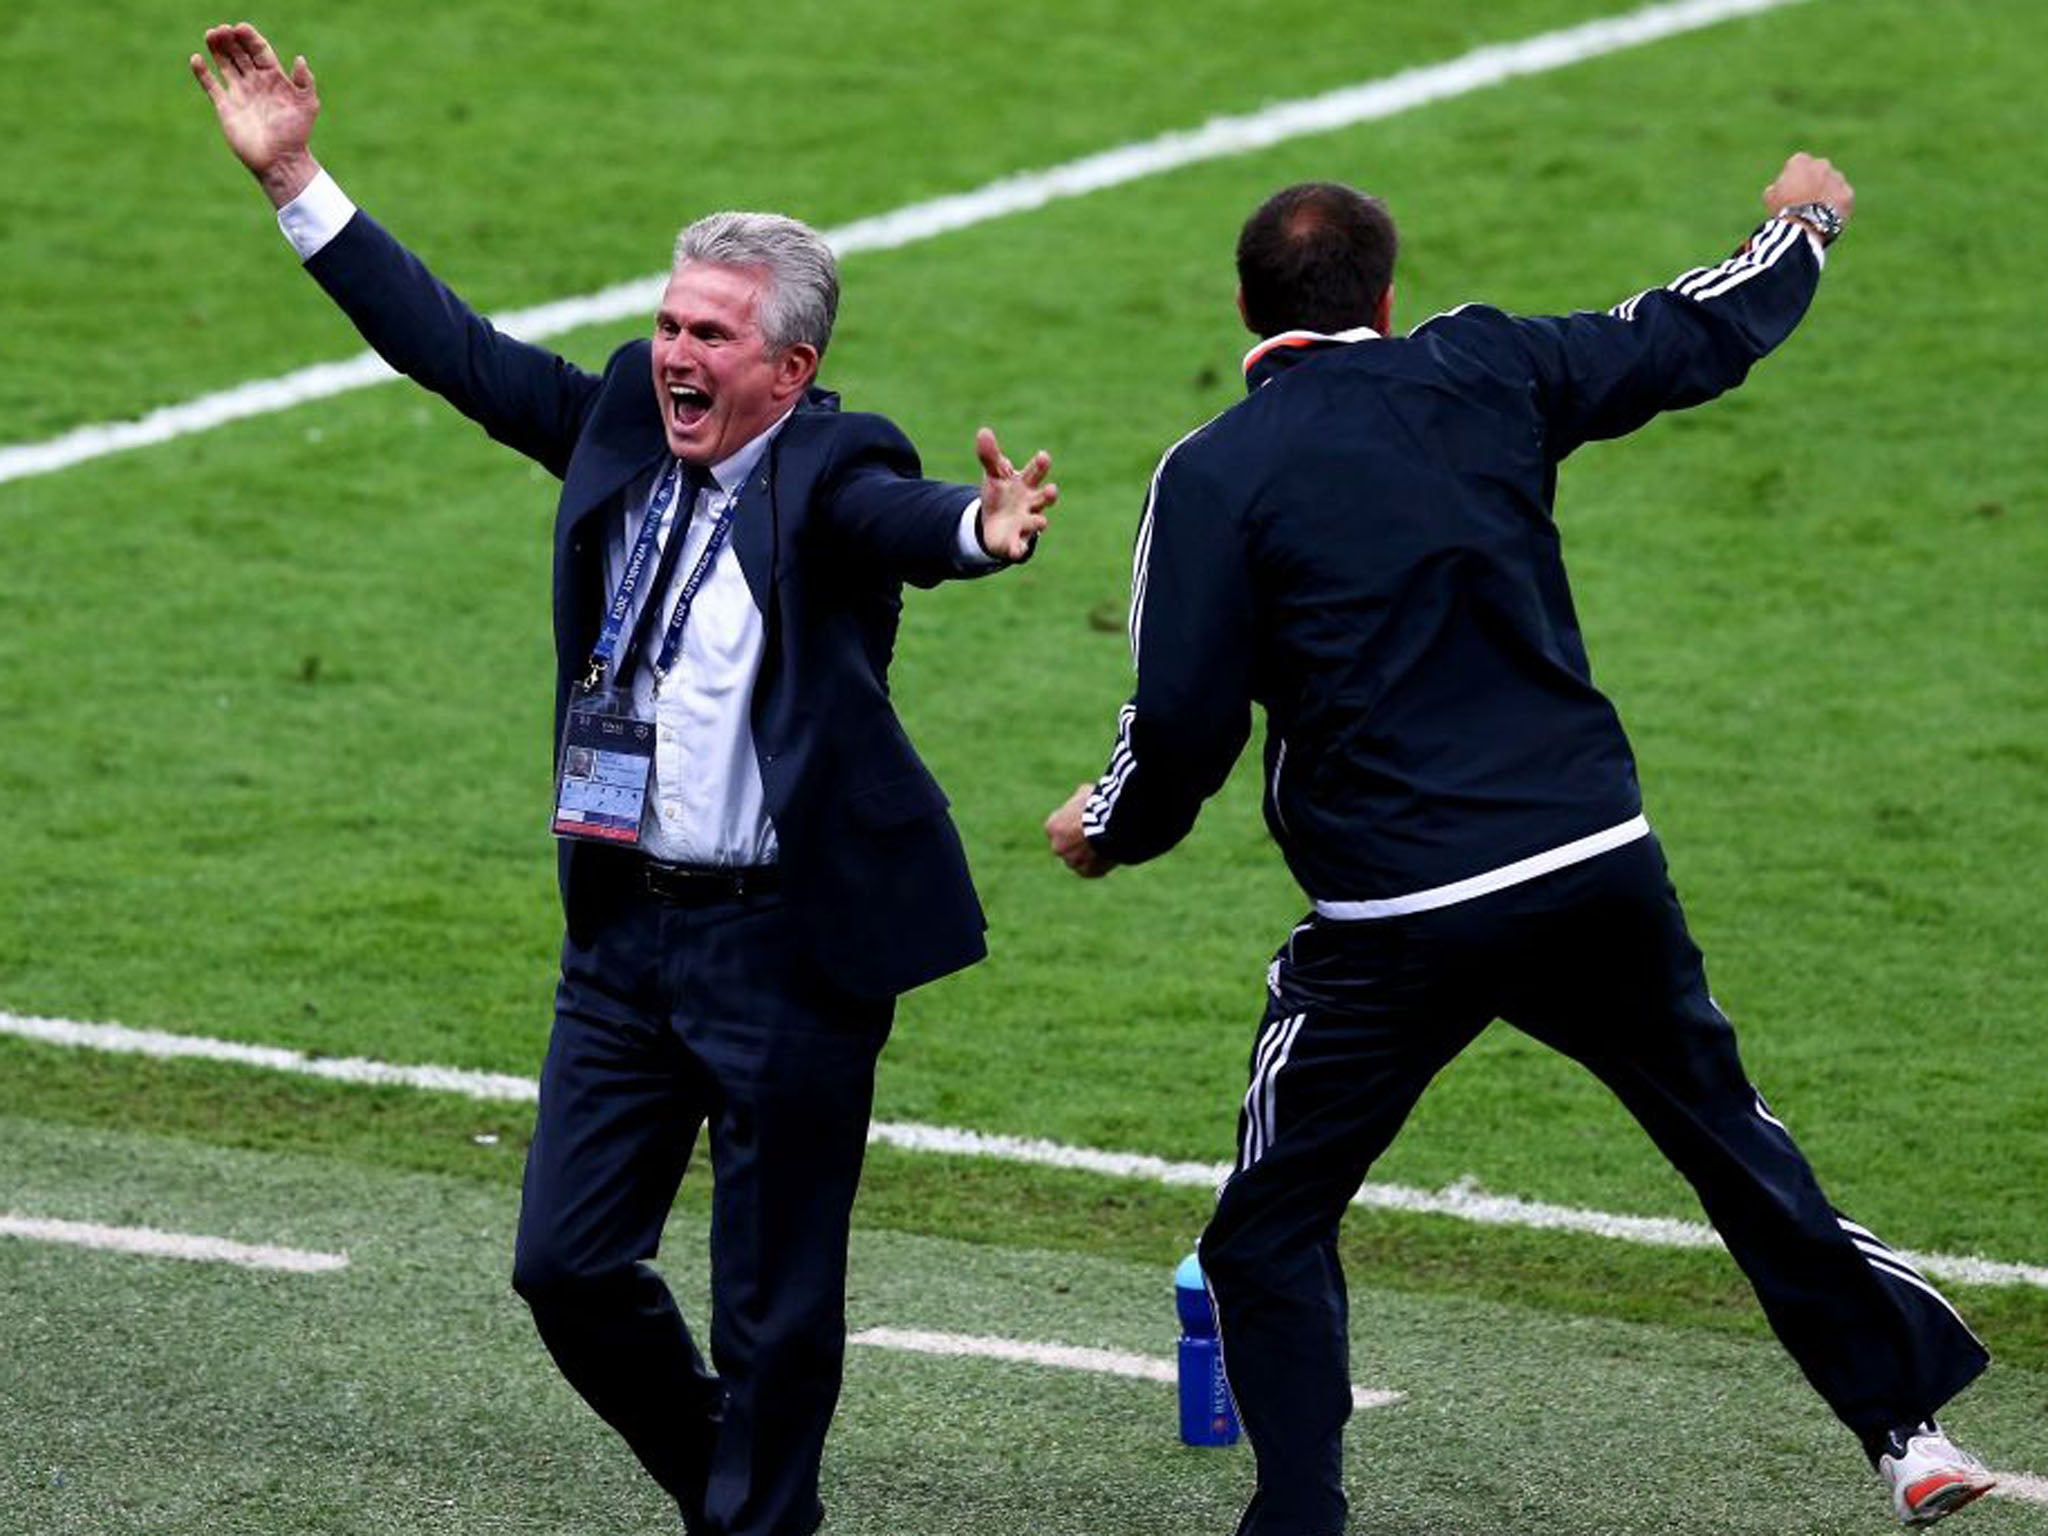 Head Coach Jupp Heynckes of Bayern Munich celebrates after the final whistle (Martin Rose/Getty Images)